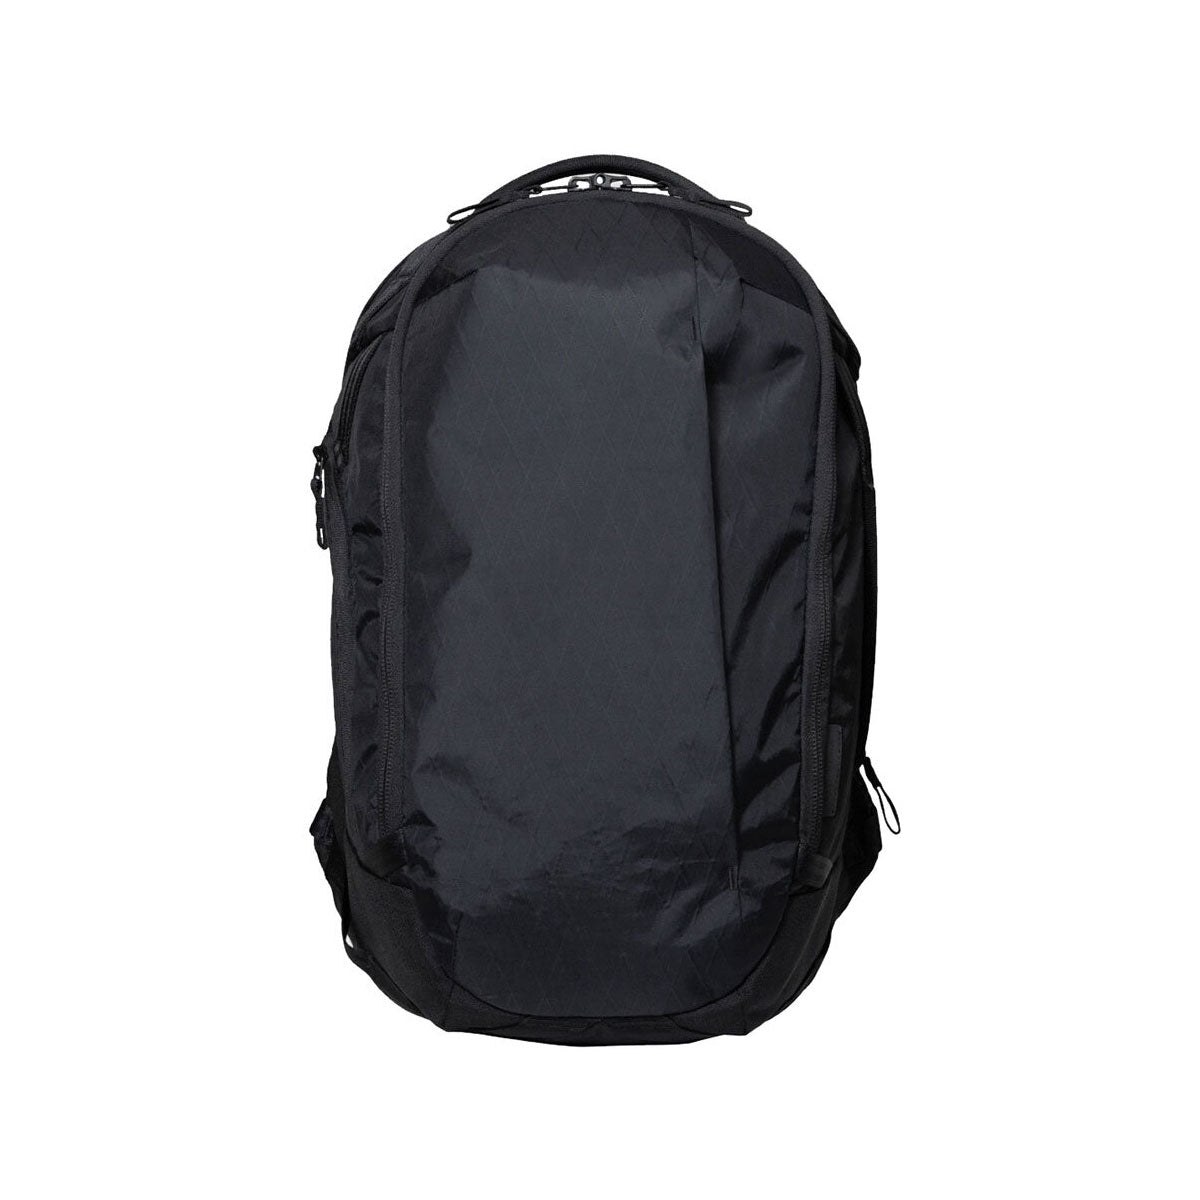 Able Carry : Max Backpack : Tarmac Black